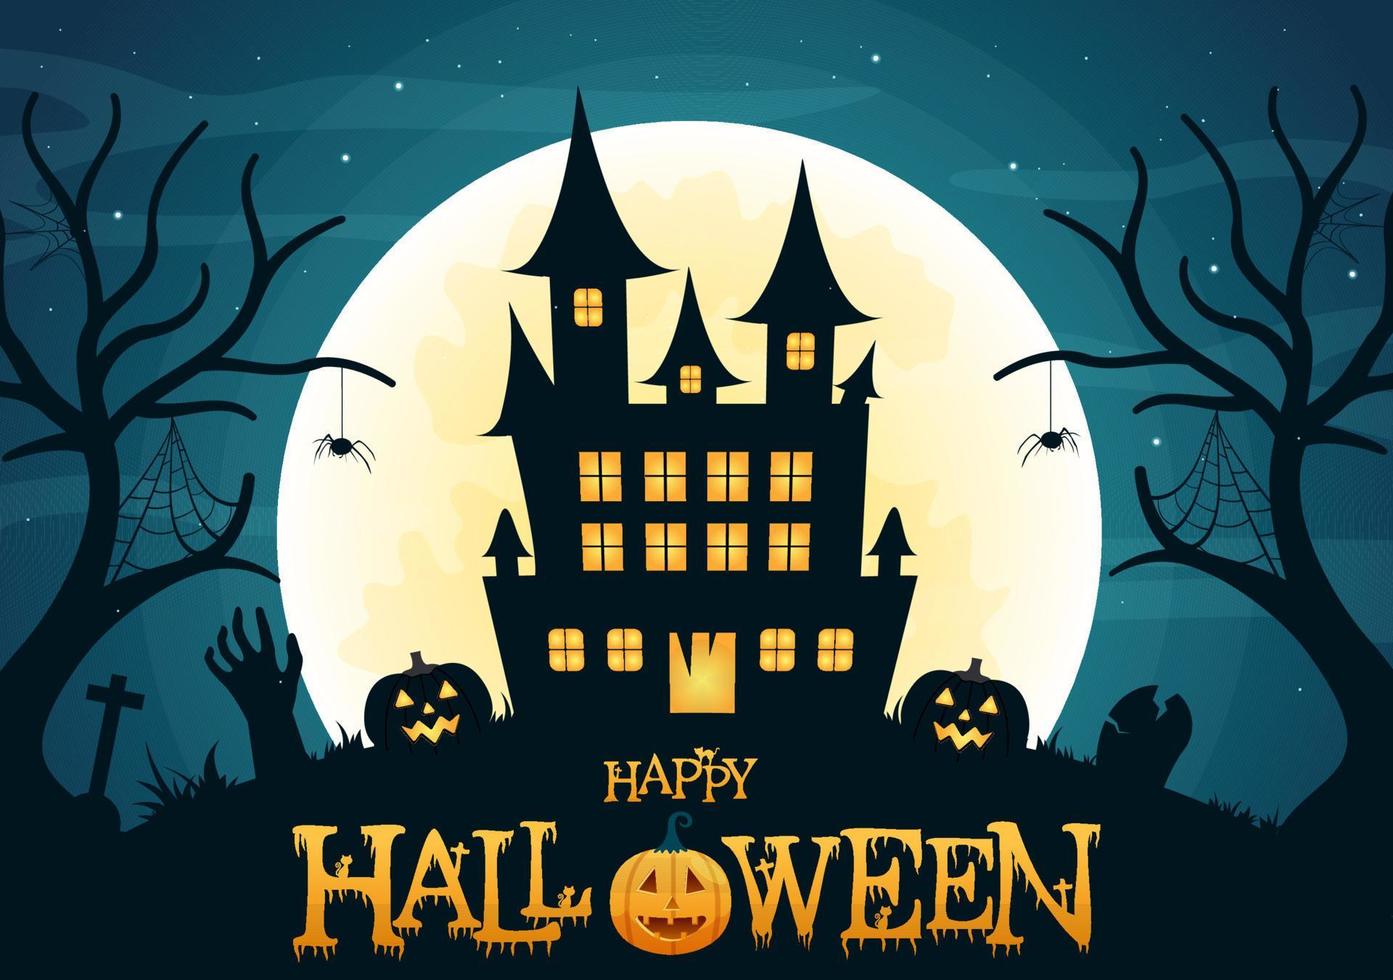 Happy Halloween Template Background Hand Drawn Cartoon Flat Illustration with Pumpkins, Bats and Dark Castle on Full Moon For Add Your Design Style vector